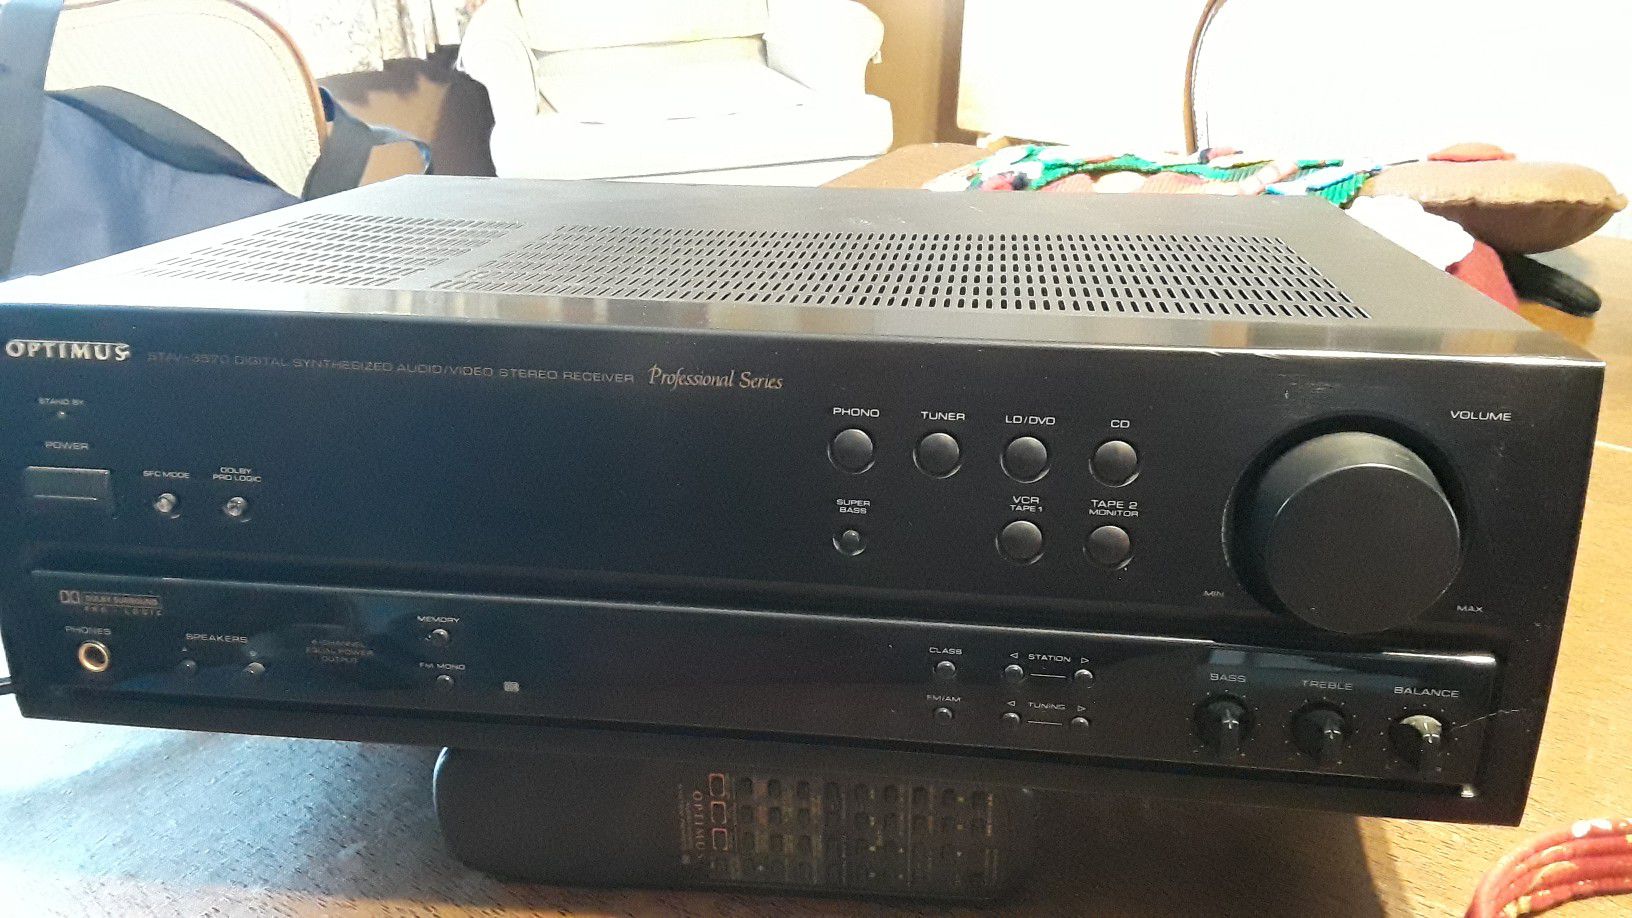 OPTIMUS STAV-3570 digital synthesized audio/video stereo receiver PROFESSIONAL SERIES